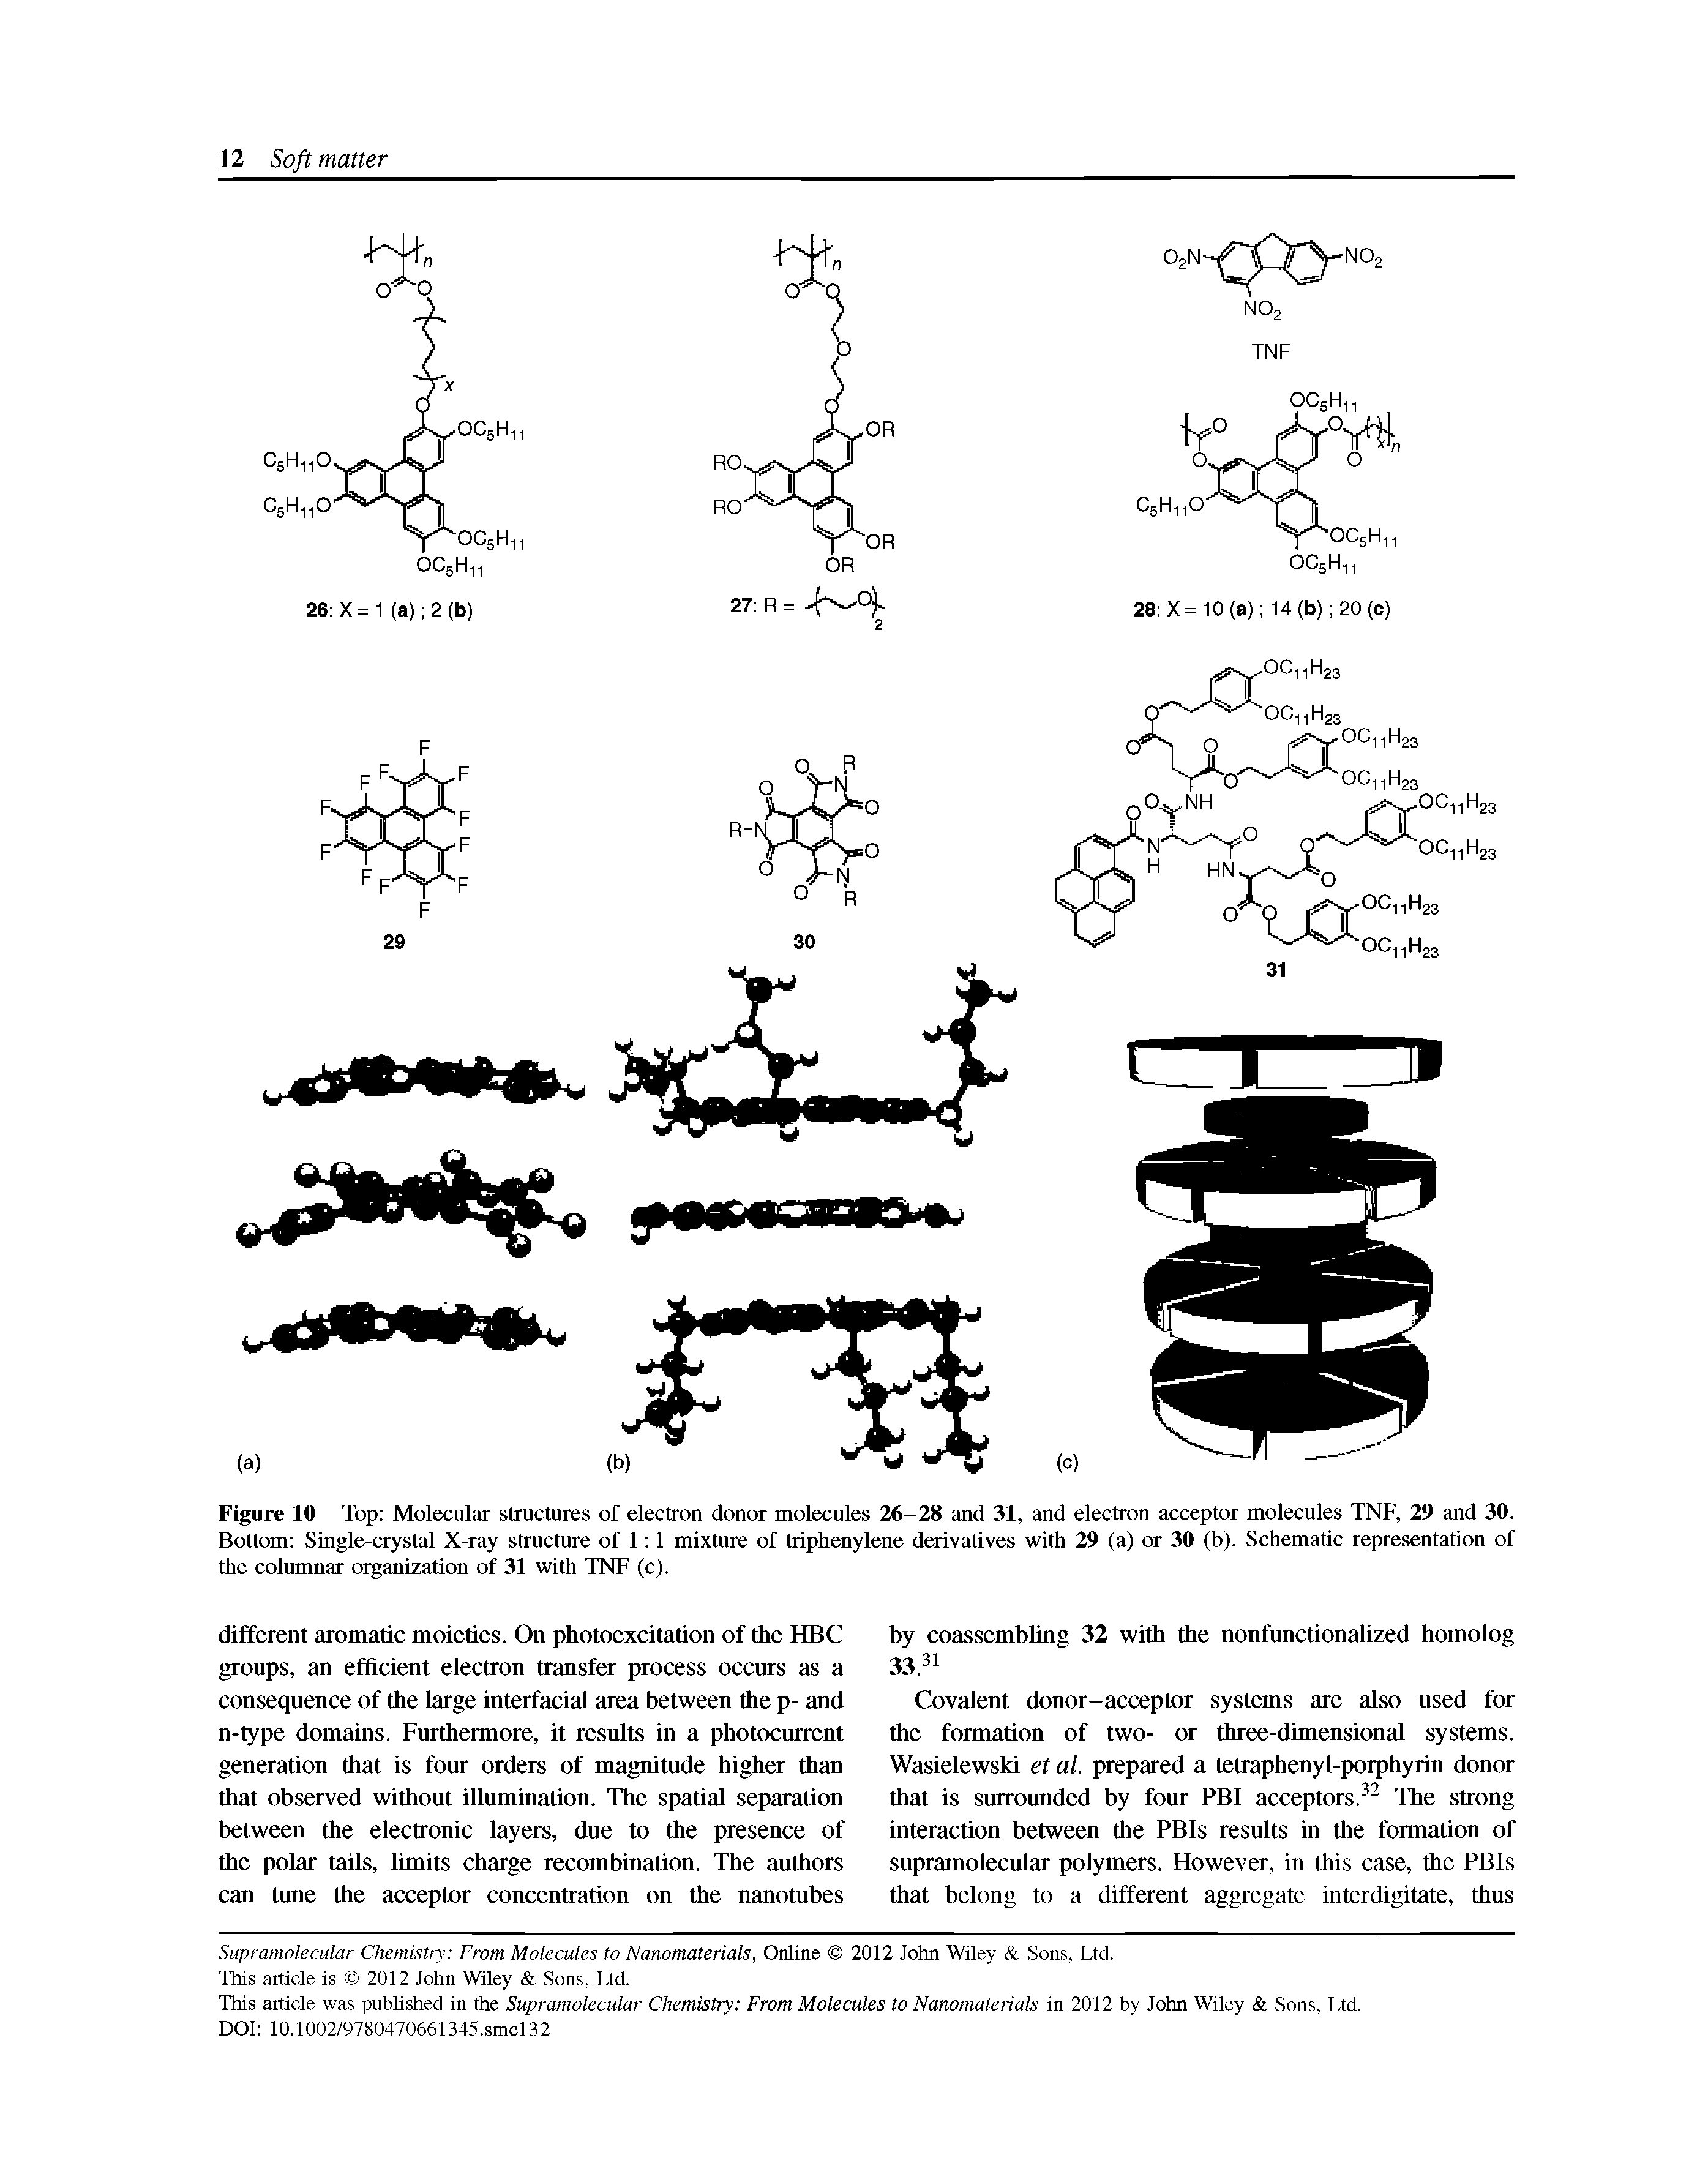 Figure 10 Top Molecular structures of electron donor molecules 26-28 and 31, and electron acceptor molecules TNF, 29 and 30. Bottom Single-crystal X-ray structure of 1 1 mixture of triphenylene derivatives with 29 (a) or 30 (b). Schematic representation of the columnar organization of 31 with TNF (c).